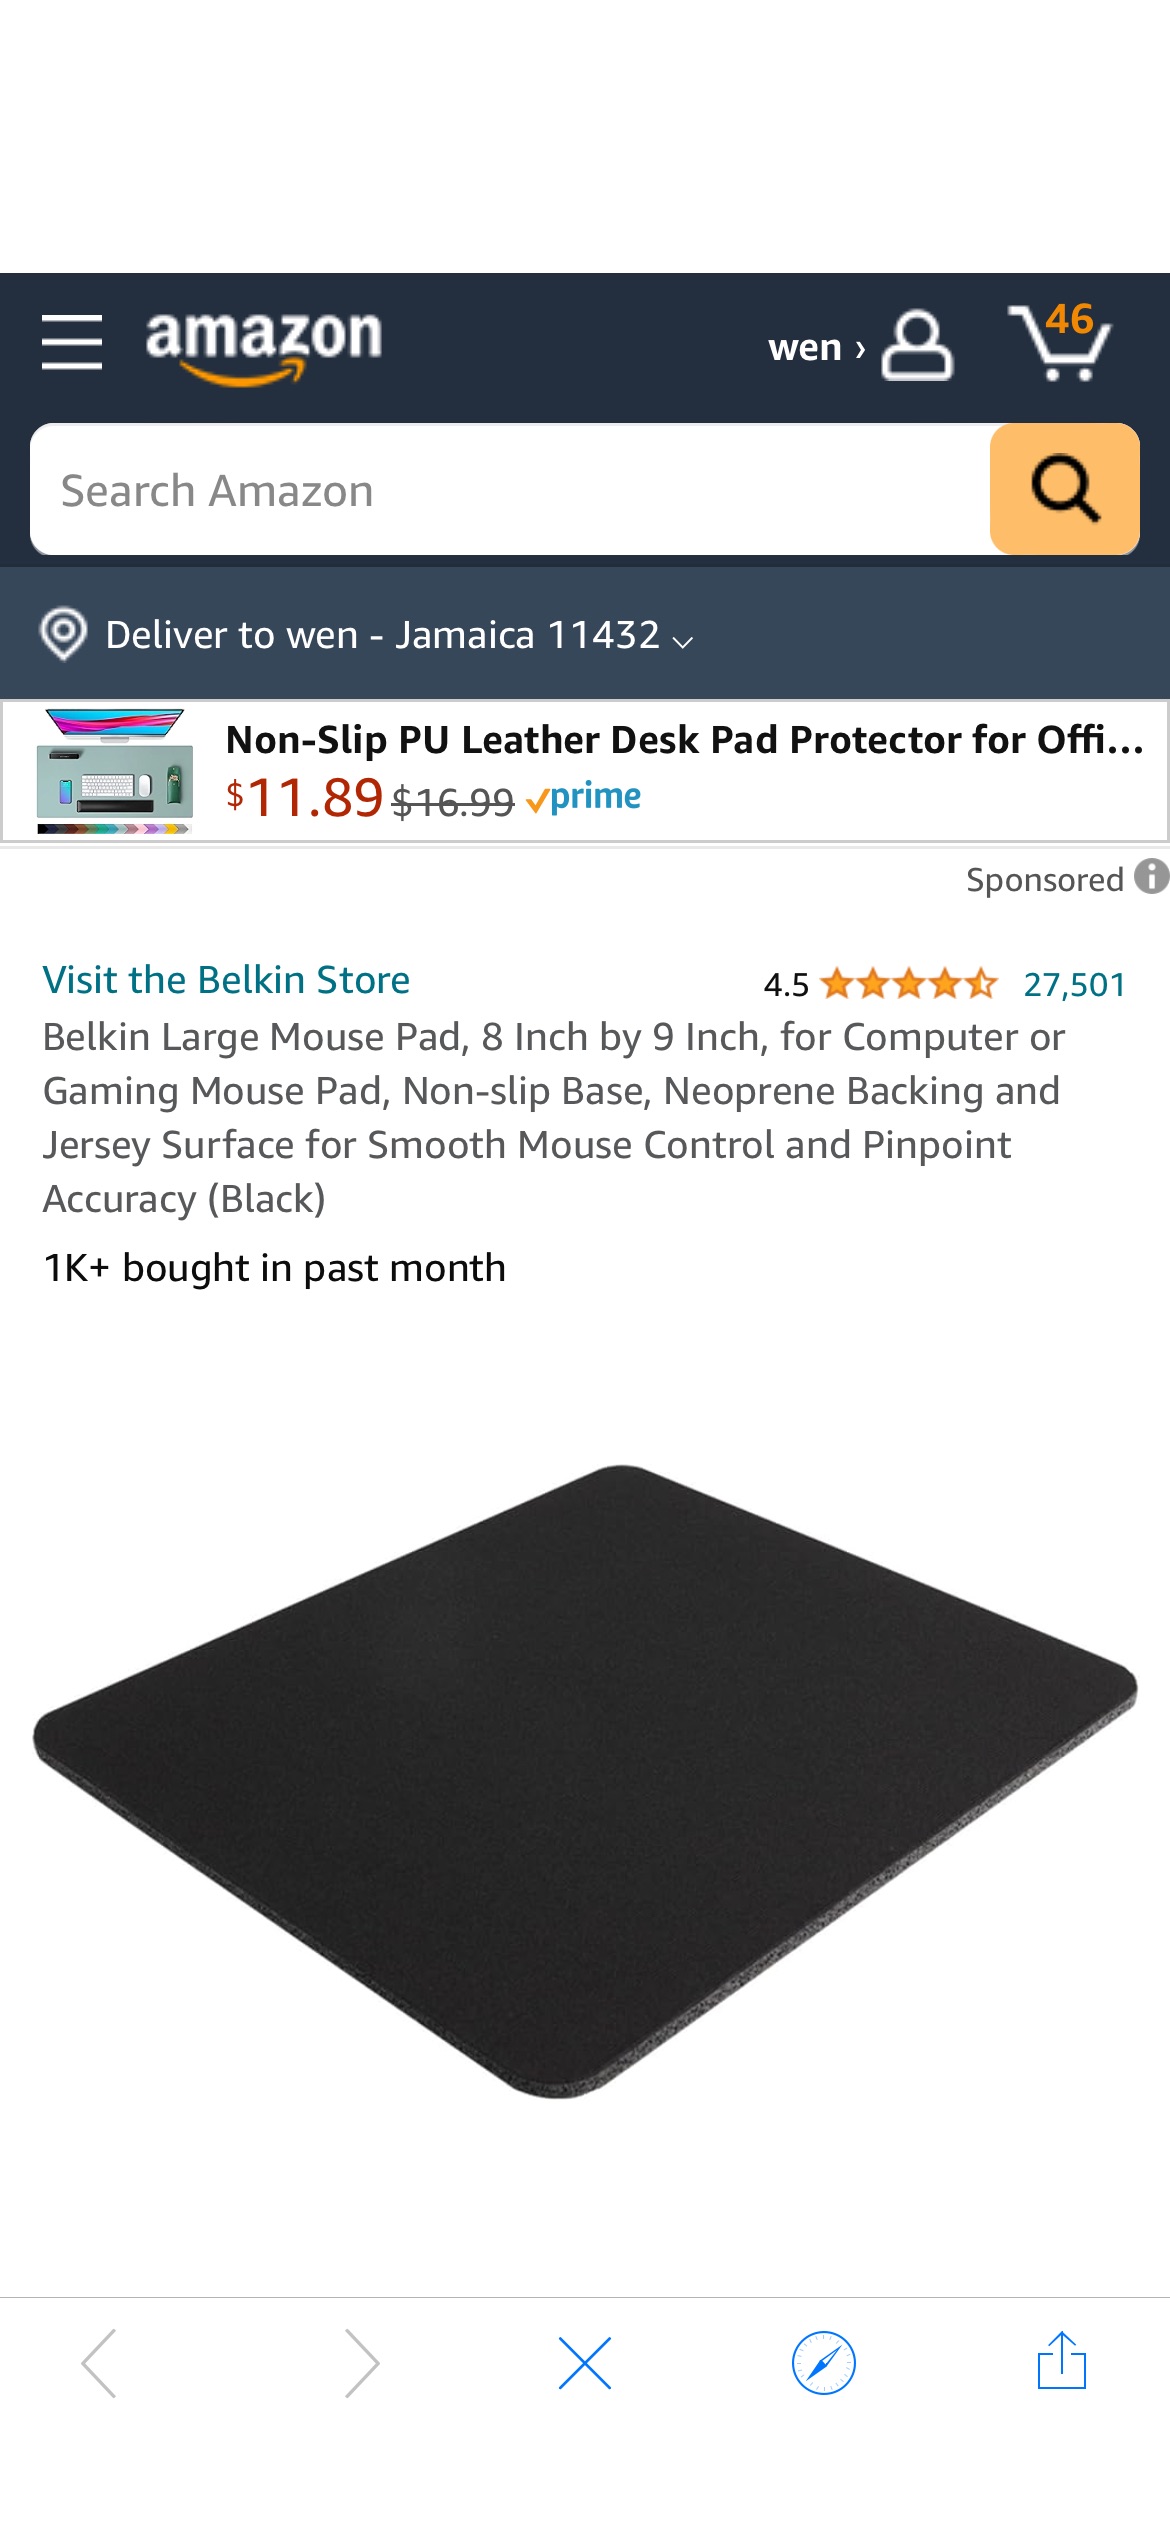 Amazon.com: Belkin Large Mouse Pad, 8 Inch by 9 Inch, for Computer or Gaming Mouse Pad, Non-slip Base, Neoprene Backing and Jersey Surface for Smooth Mouse Control and Pinpoint Accuracy (Black) : Elec